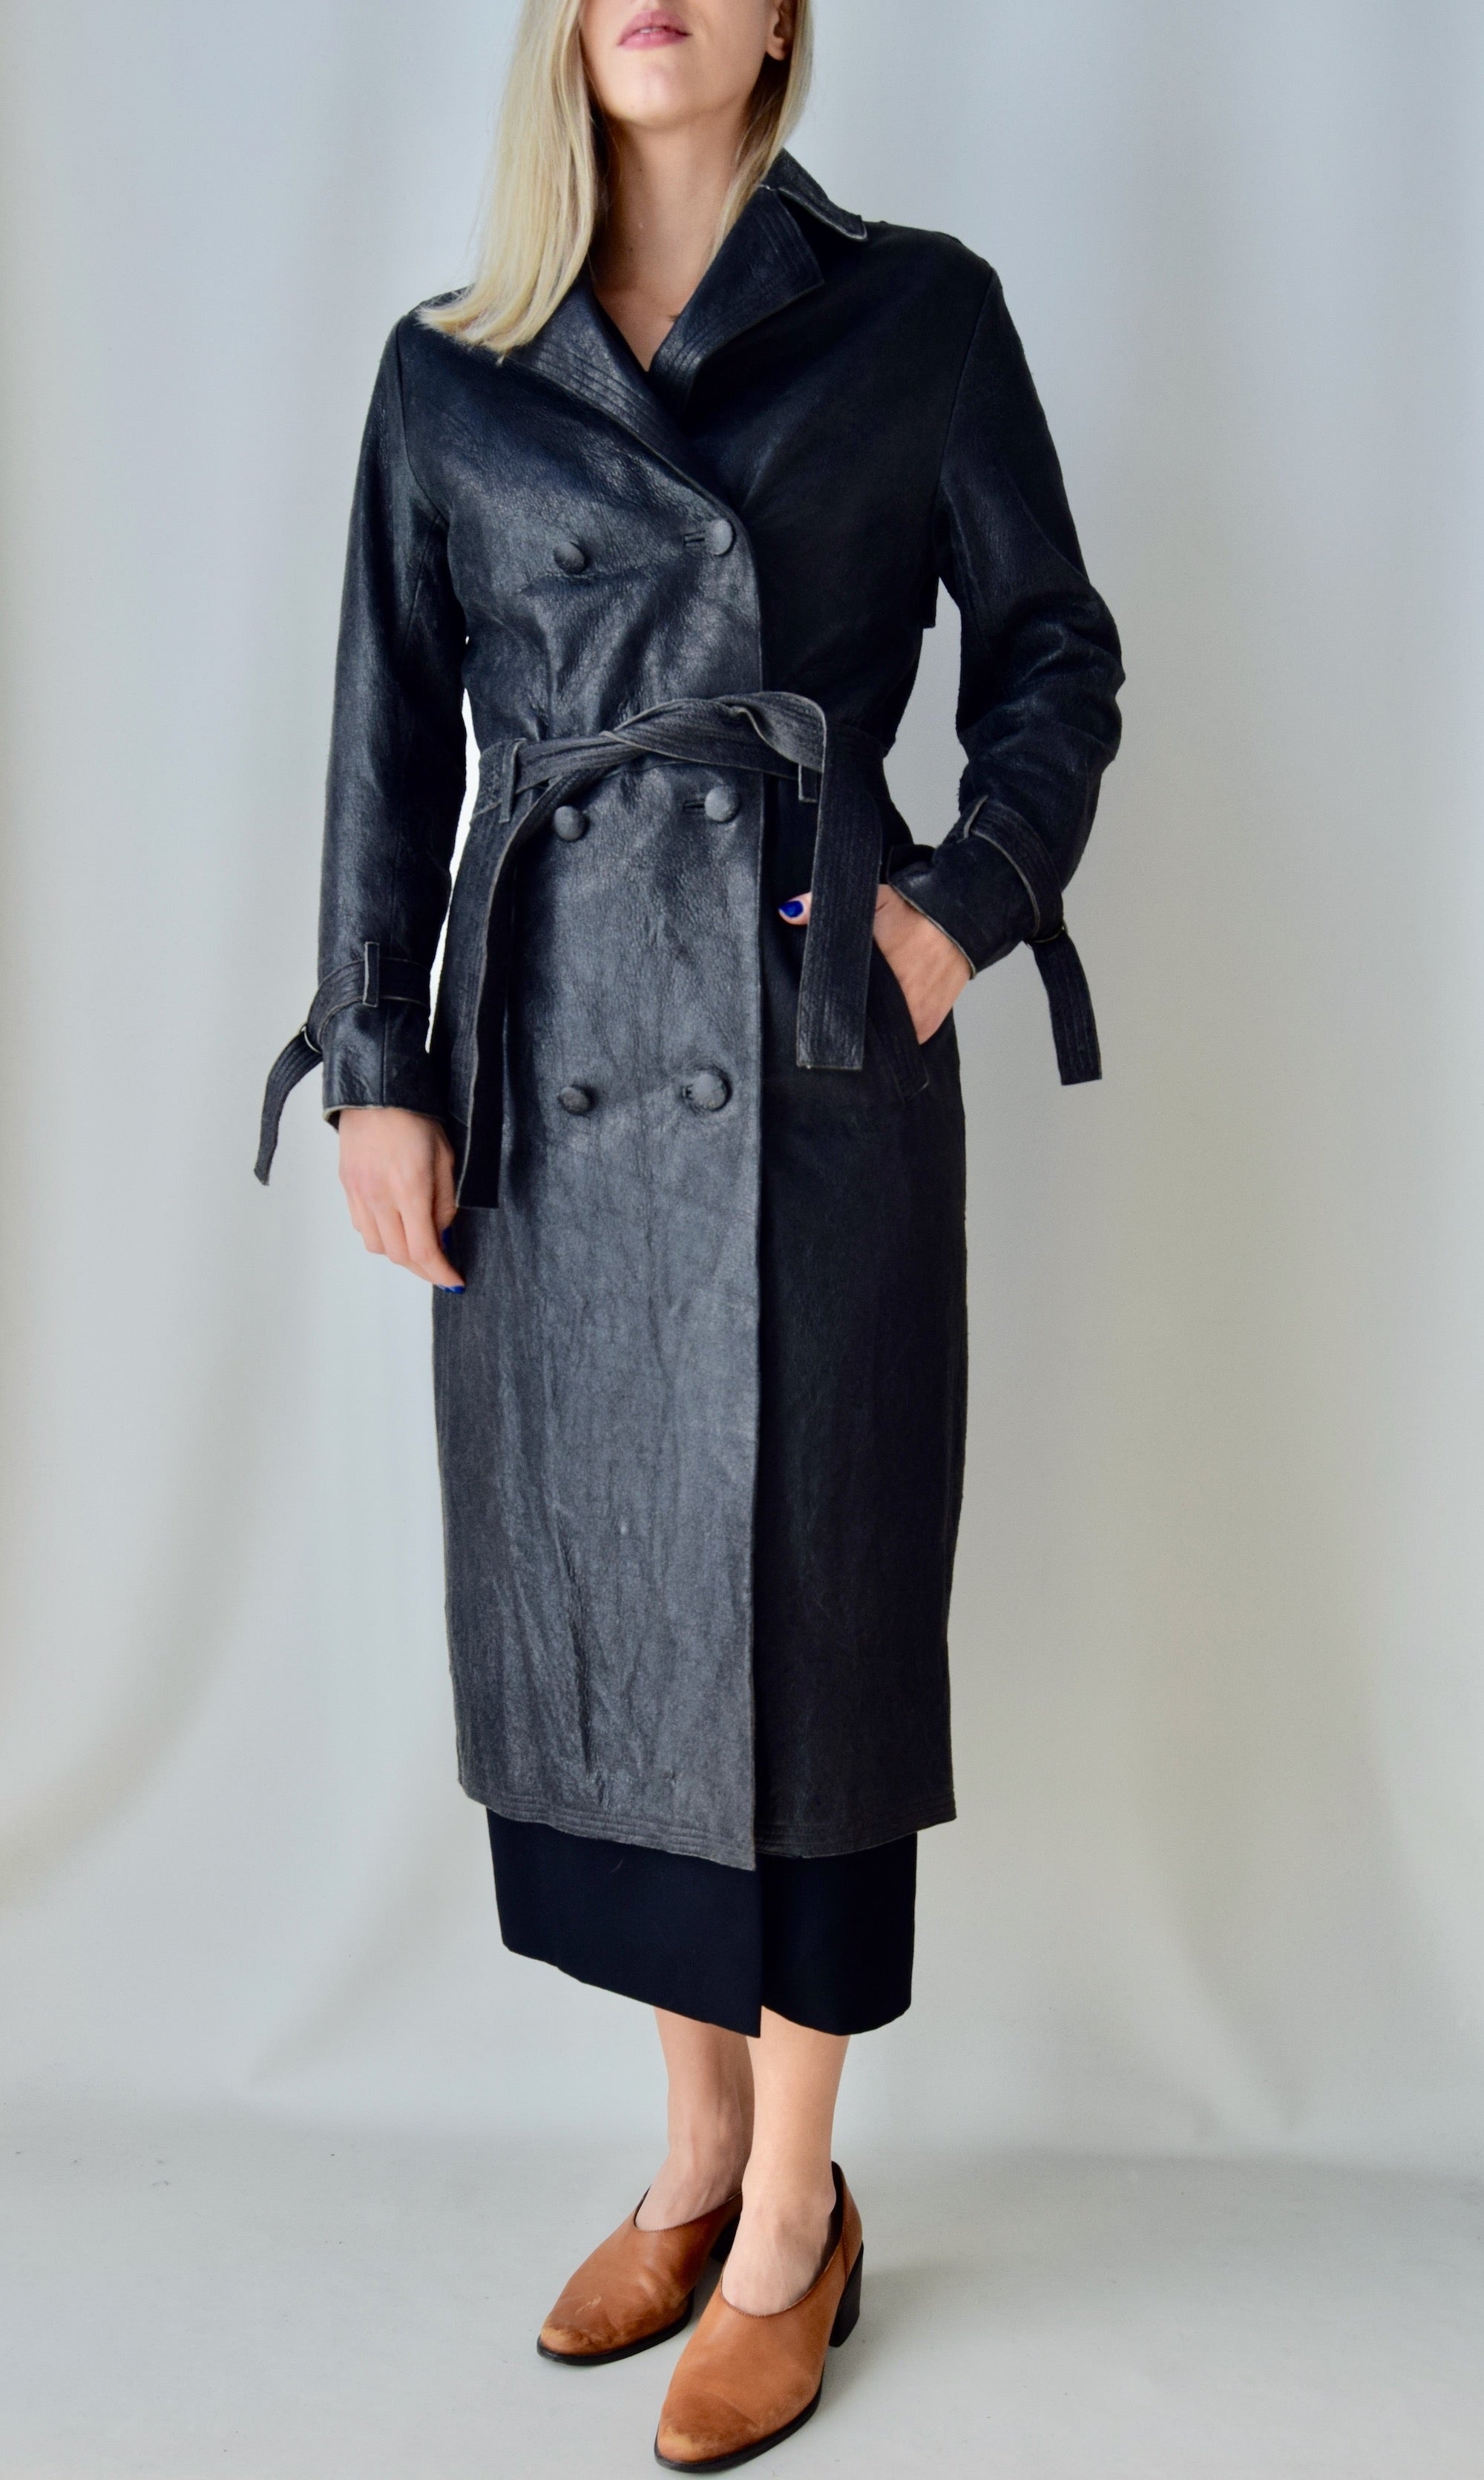 Distressed Effect Leather Trench